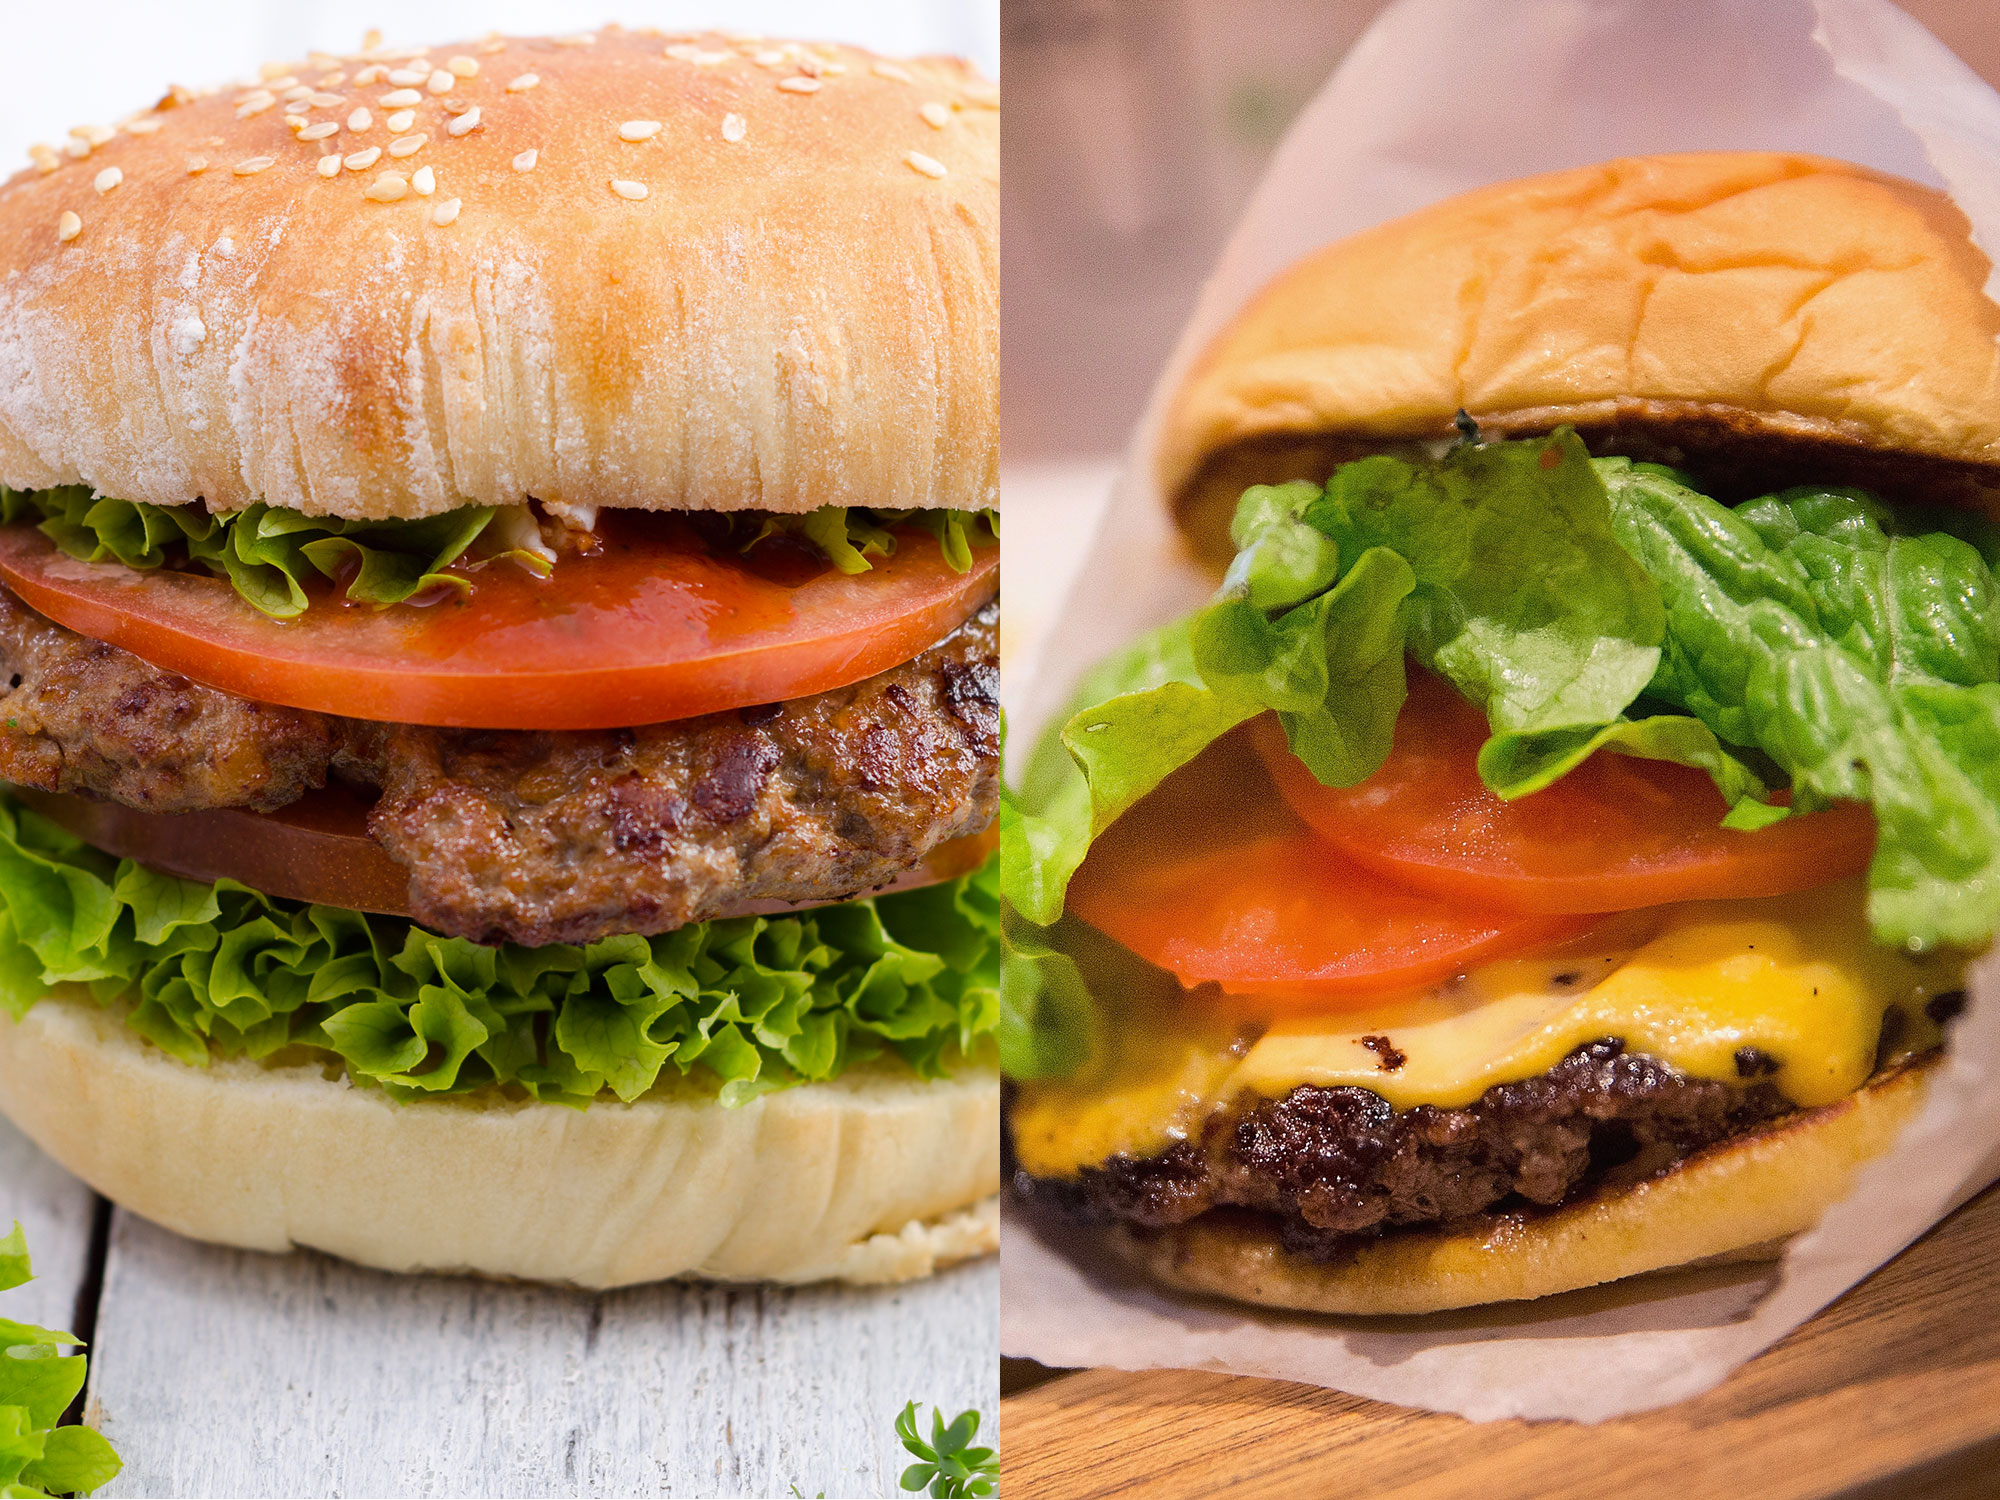 Can a Hamburger Have Cheese or Is That a Cheeseburger? | MyRecipes